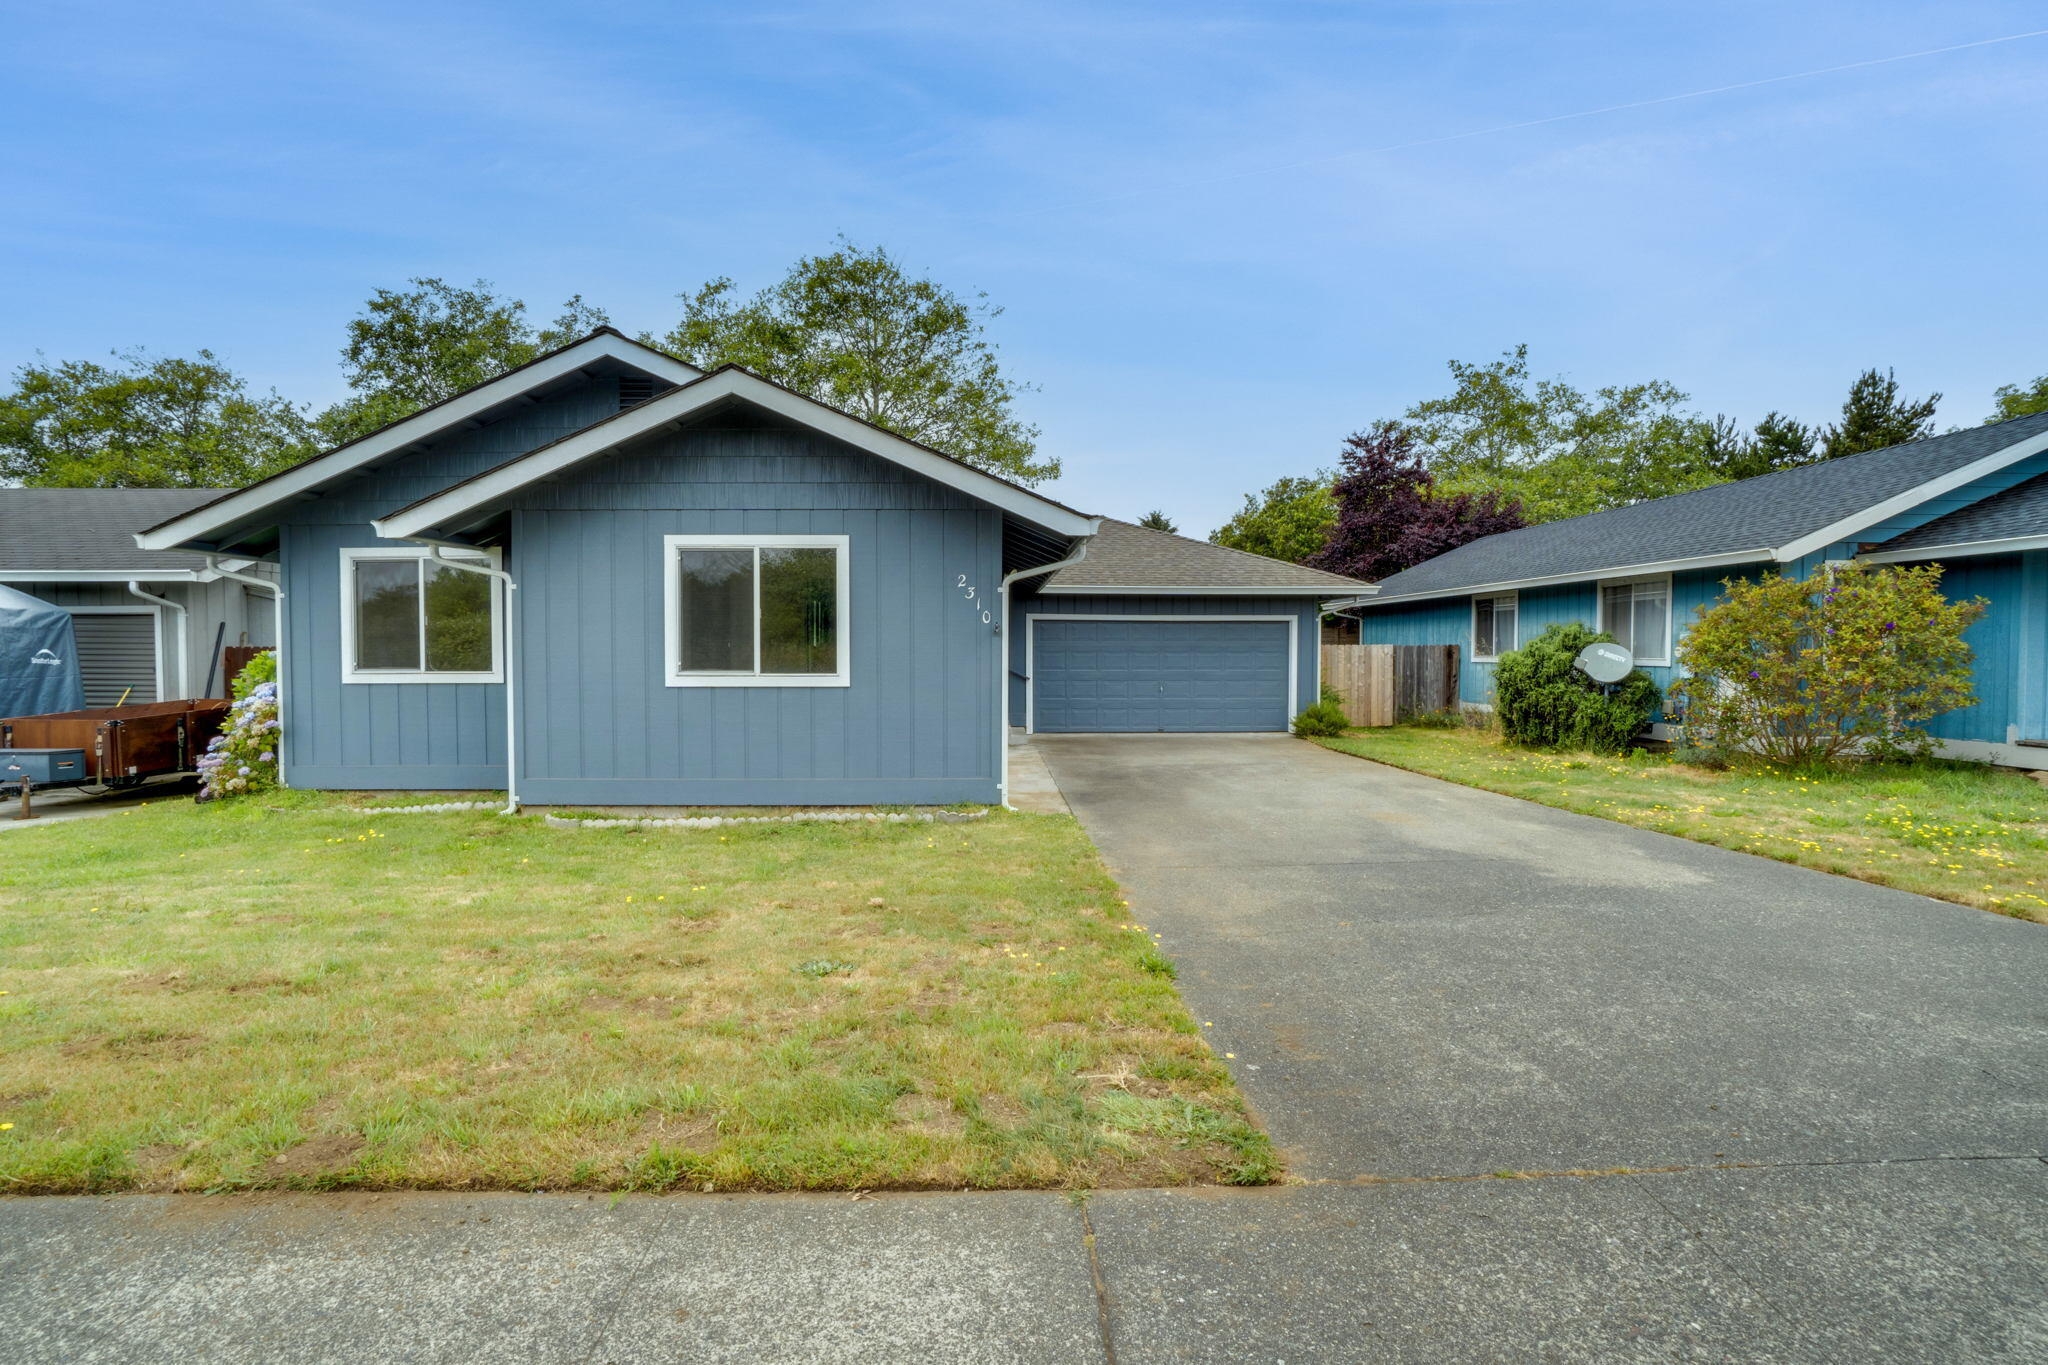 Homes for sale in Mckinleyville | View 2310 Thiel Avenue | 3 Beds